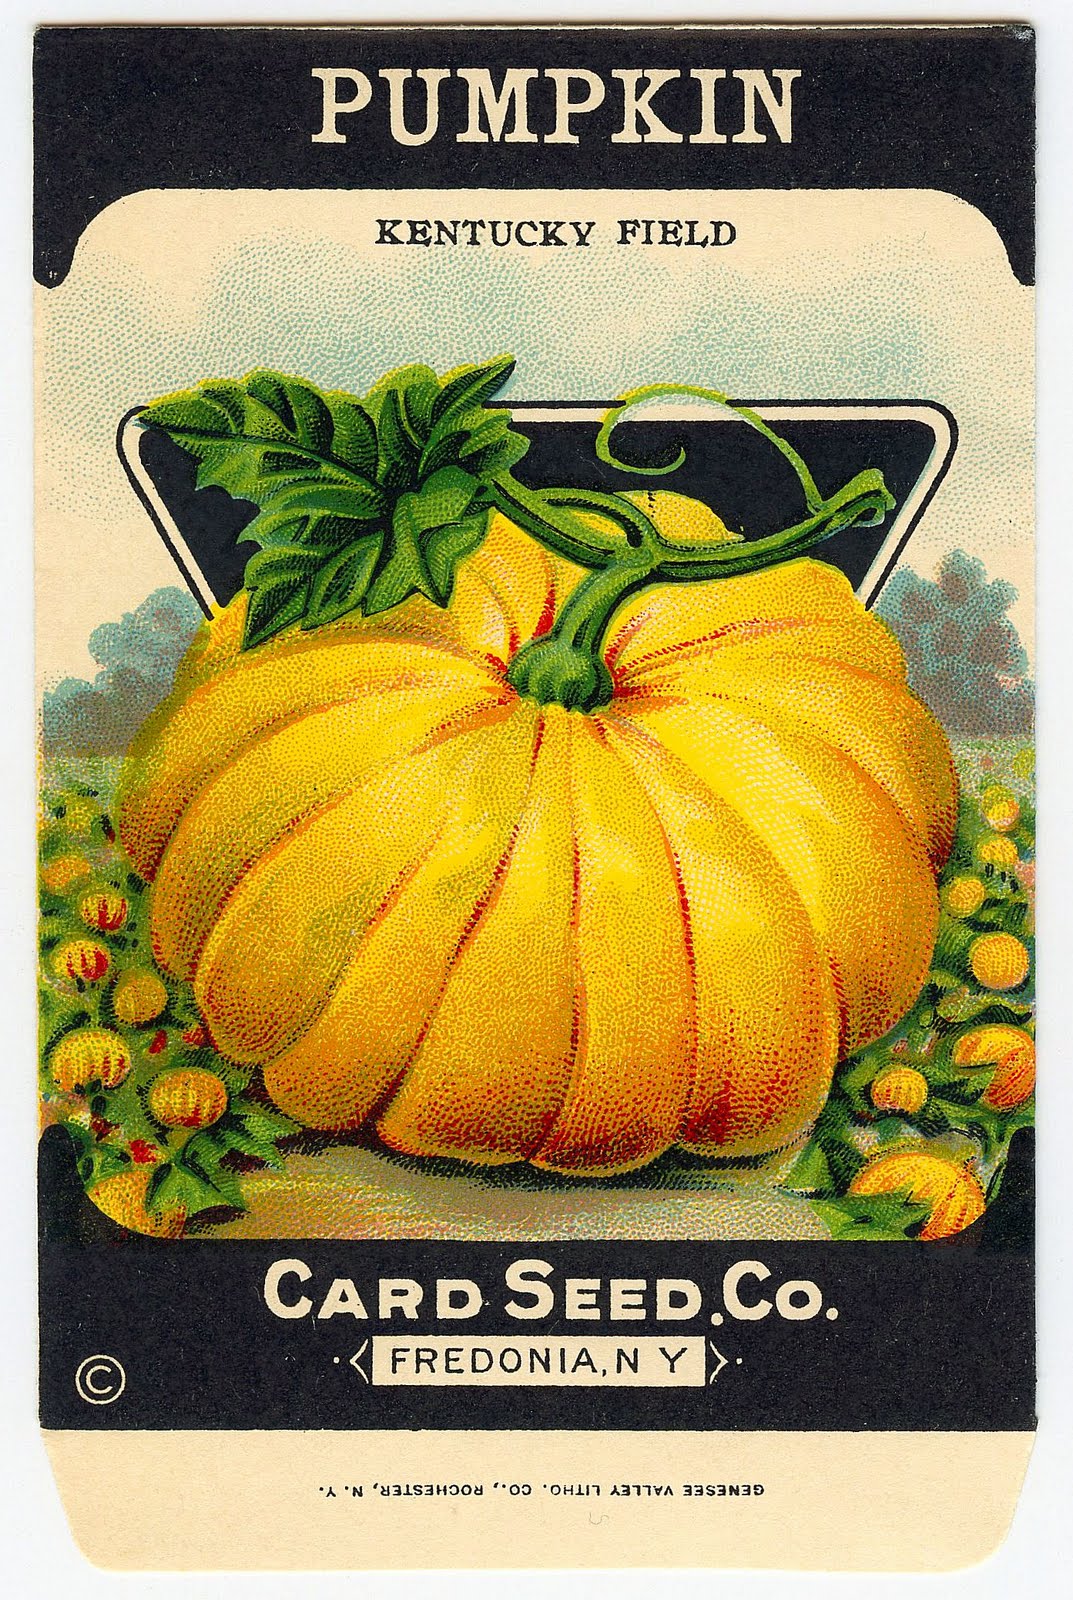 clipart vintage seed packets - photo #10